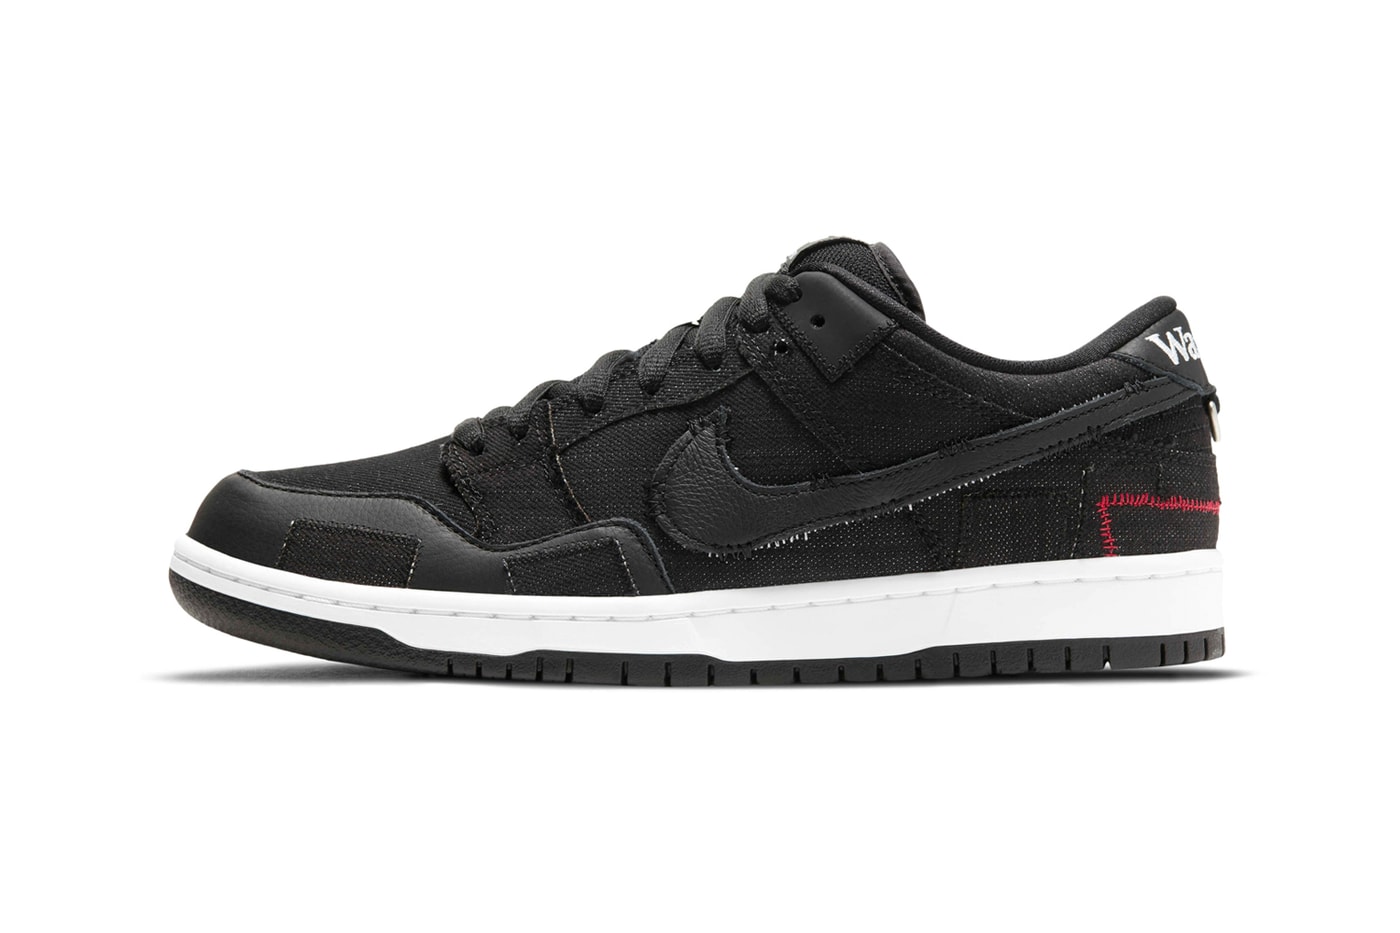 Verdy x Nike SB Dunk Low "Wasted Youth"